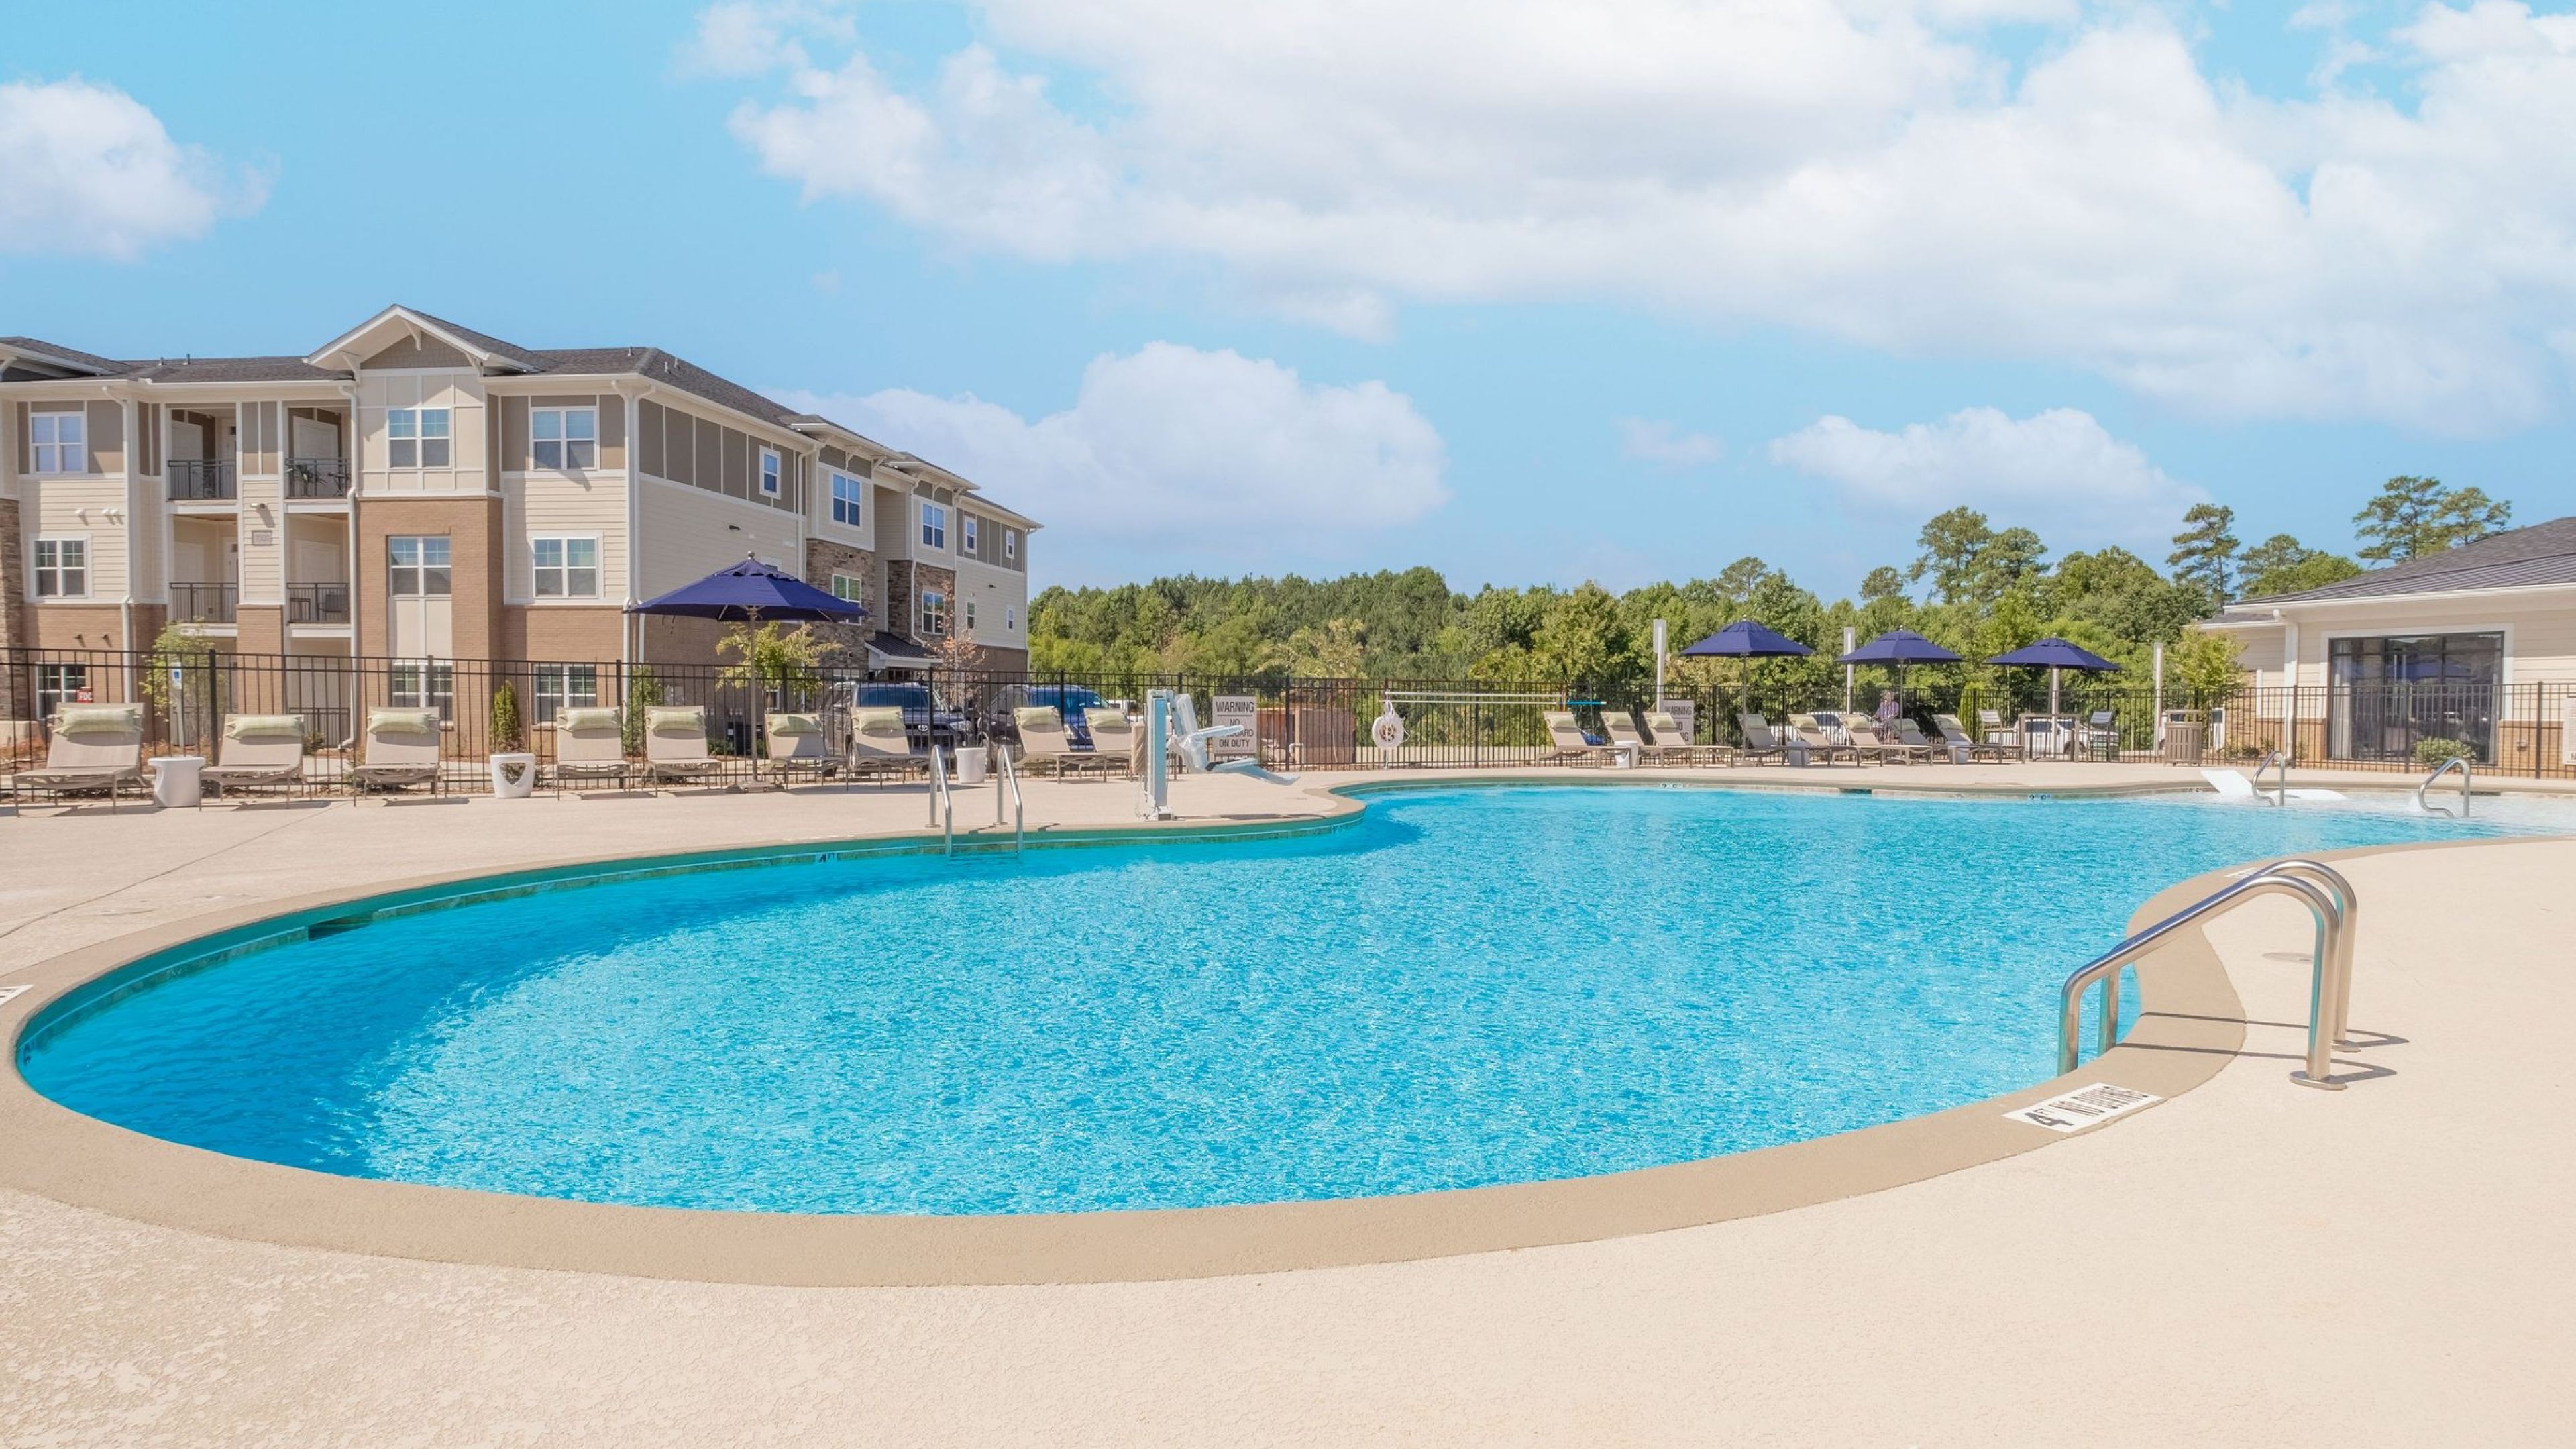 Hawthorne at Holly Springs luxurious outdoor pool with lounge seating, surrounded by apartment buildings